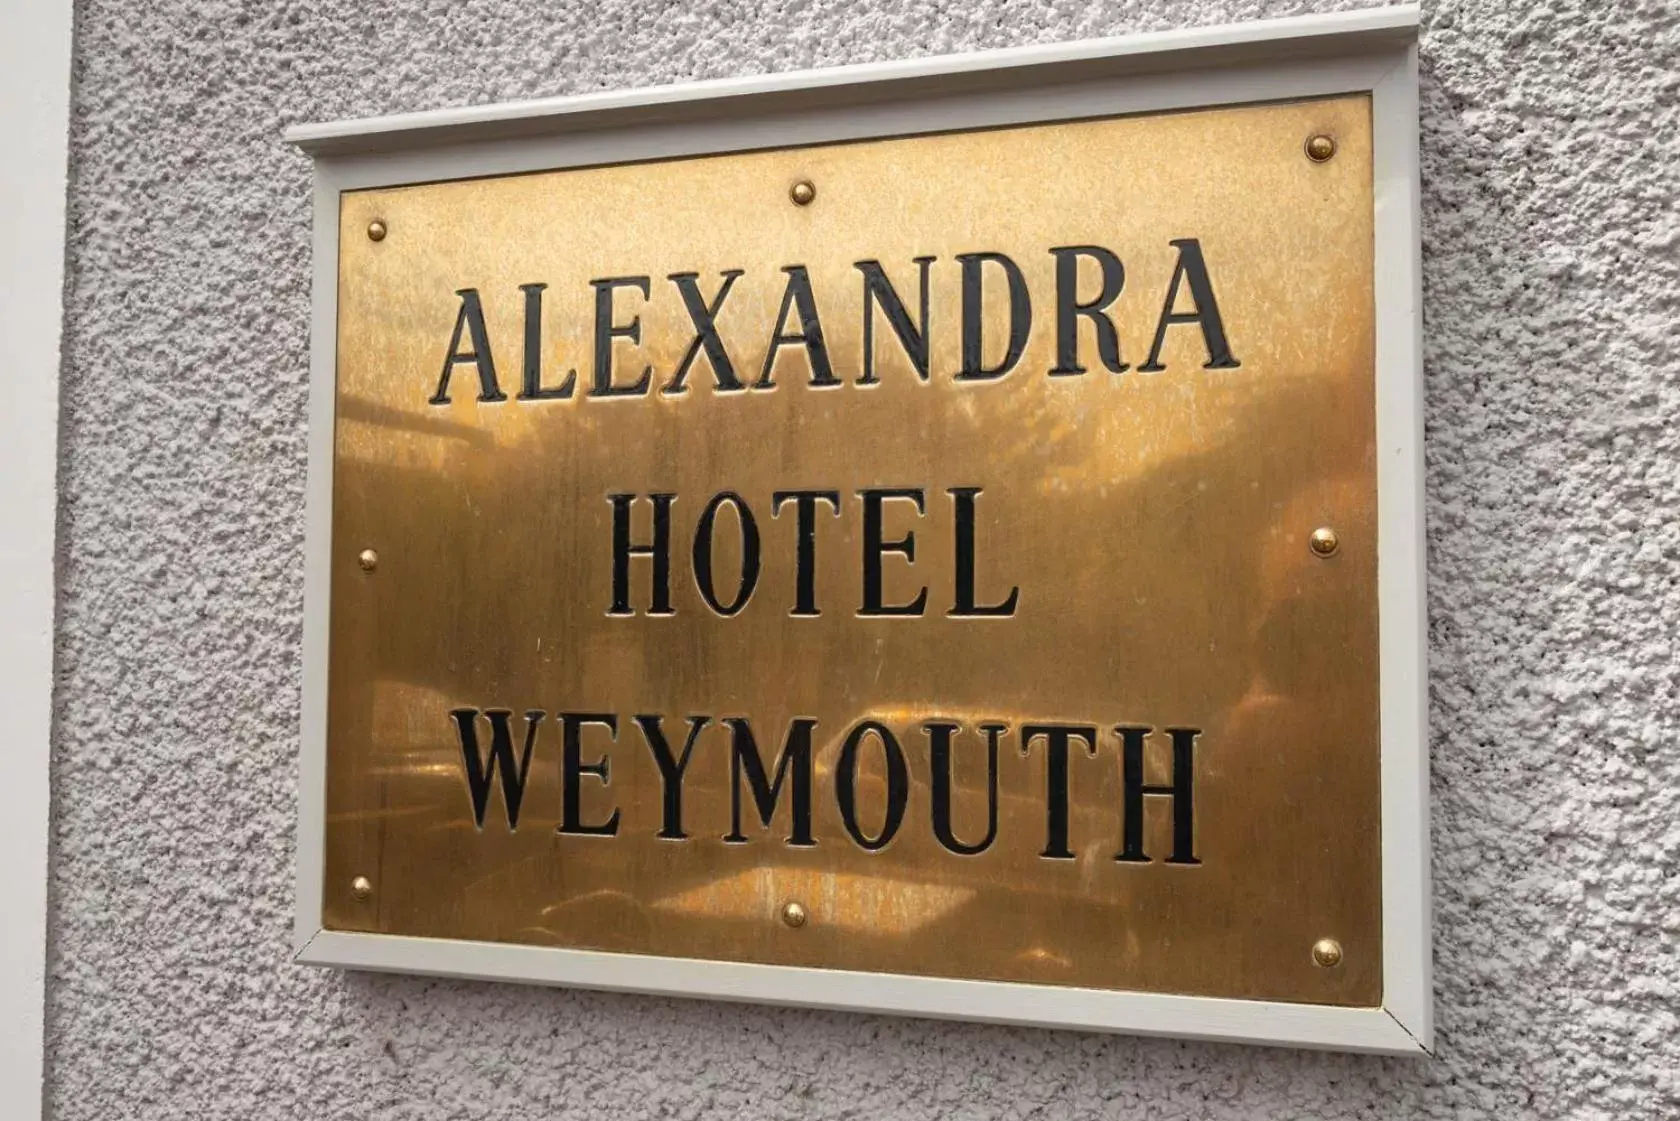 Property logo or sign, Property Logo/Sign in Alexandra Hotel